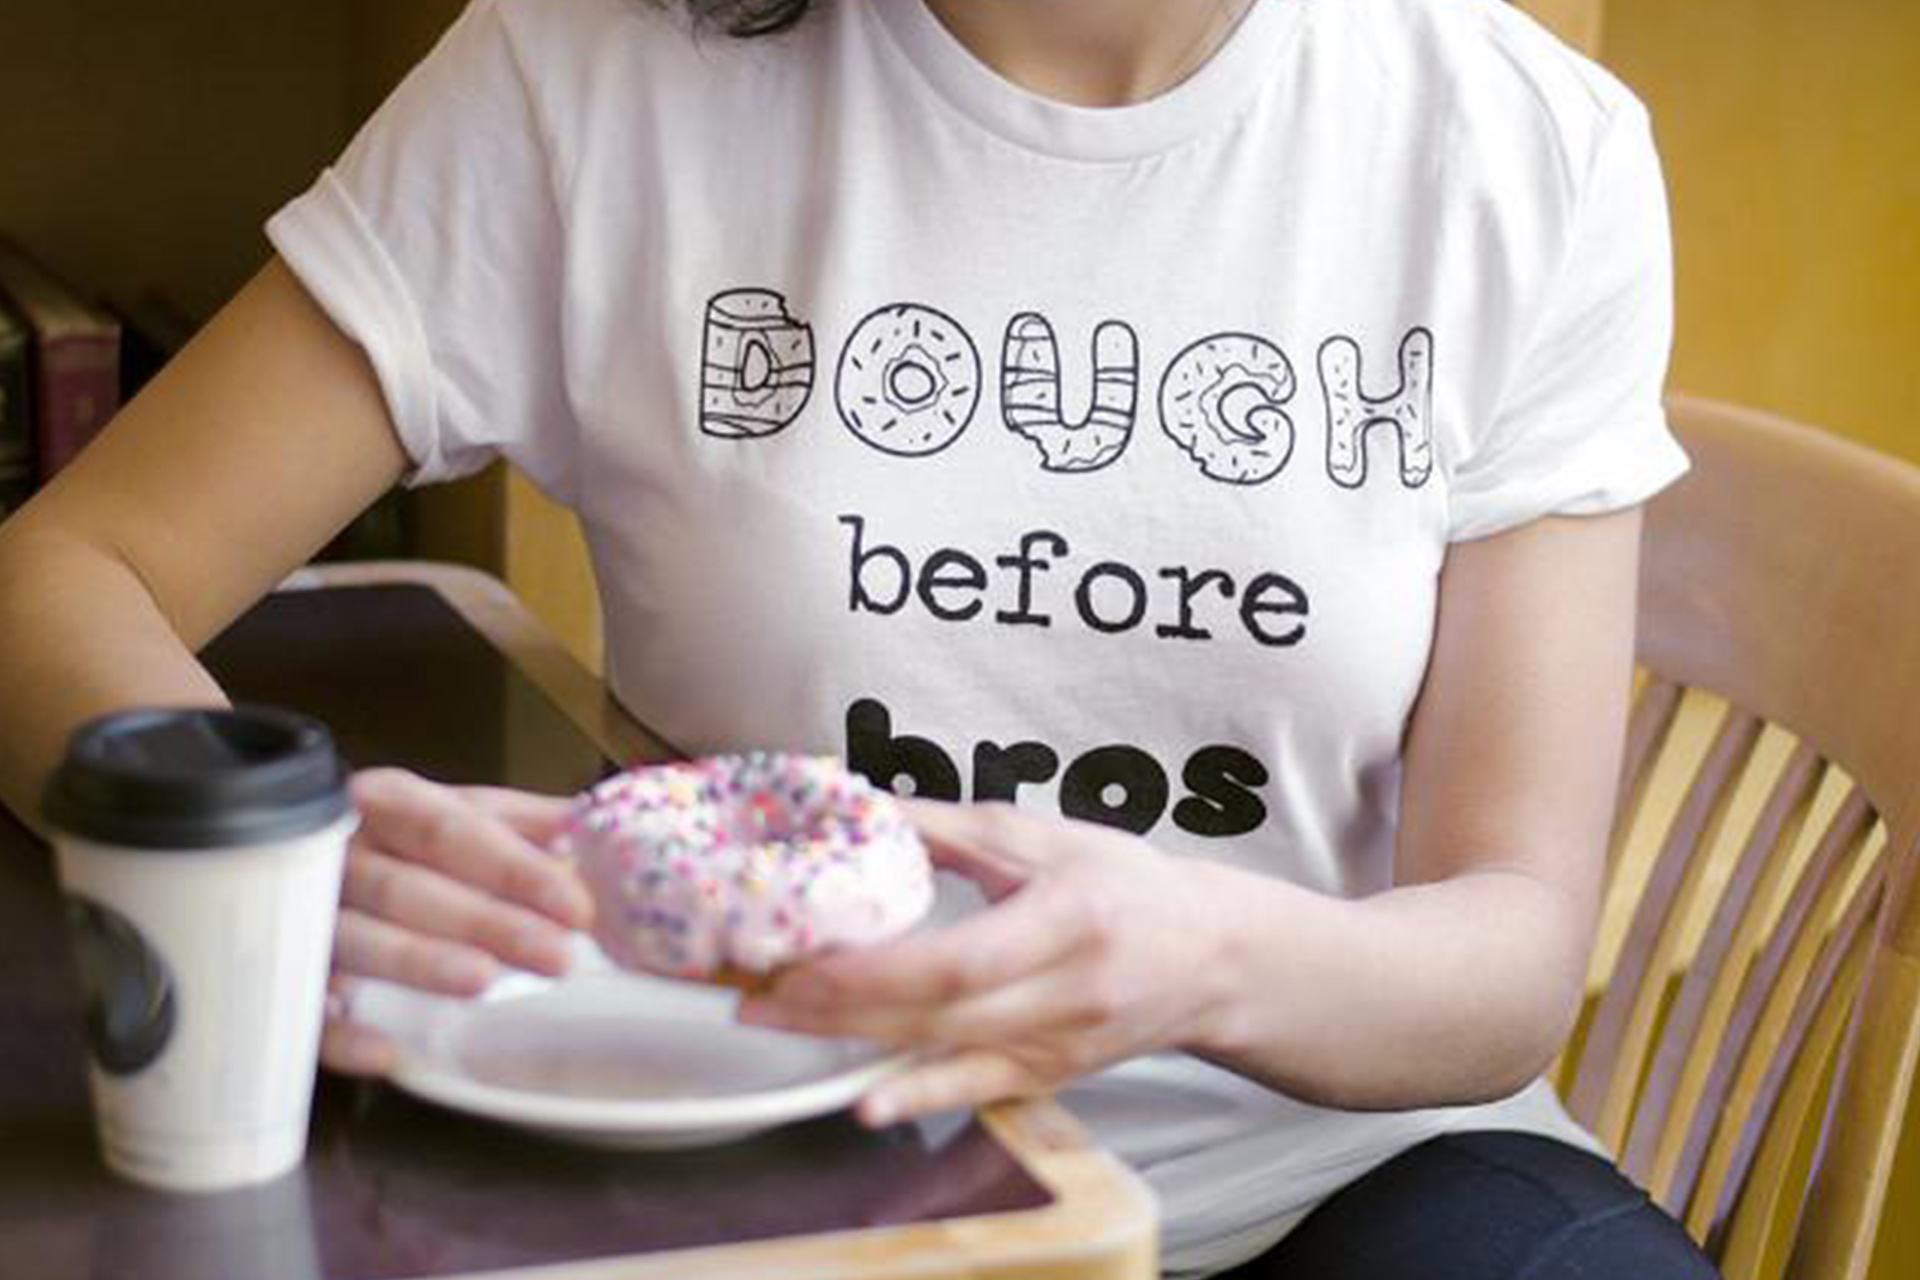 22 Reasons Why Junk Food Should Be Worn, Not Eaten